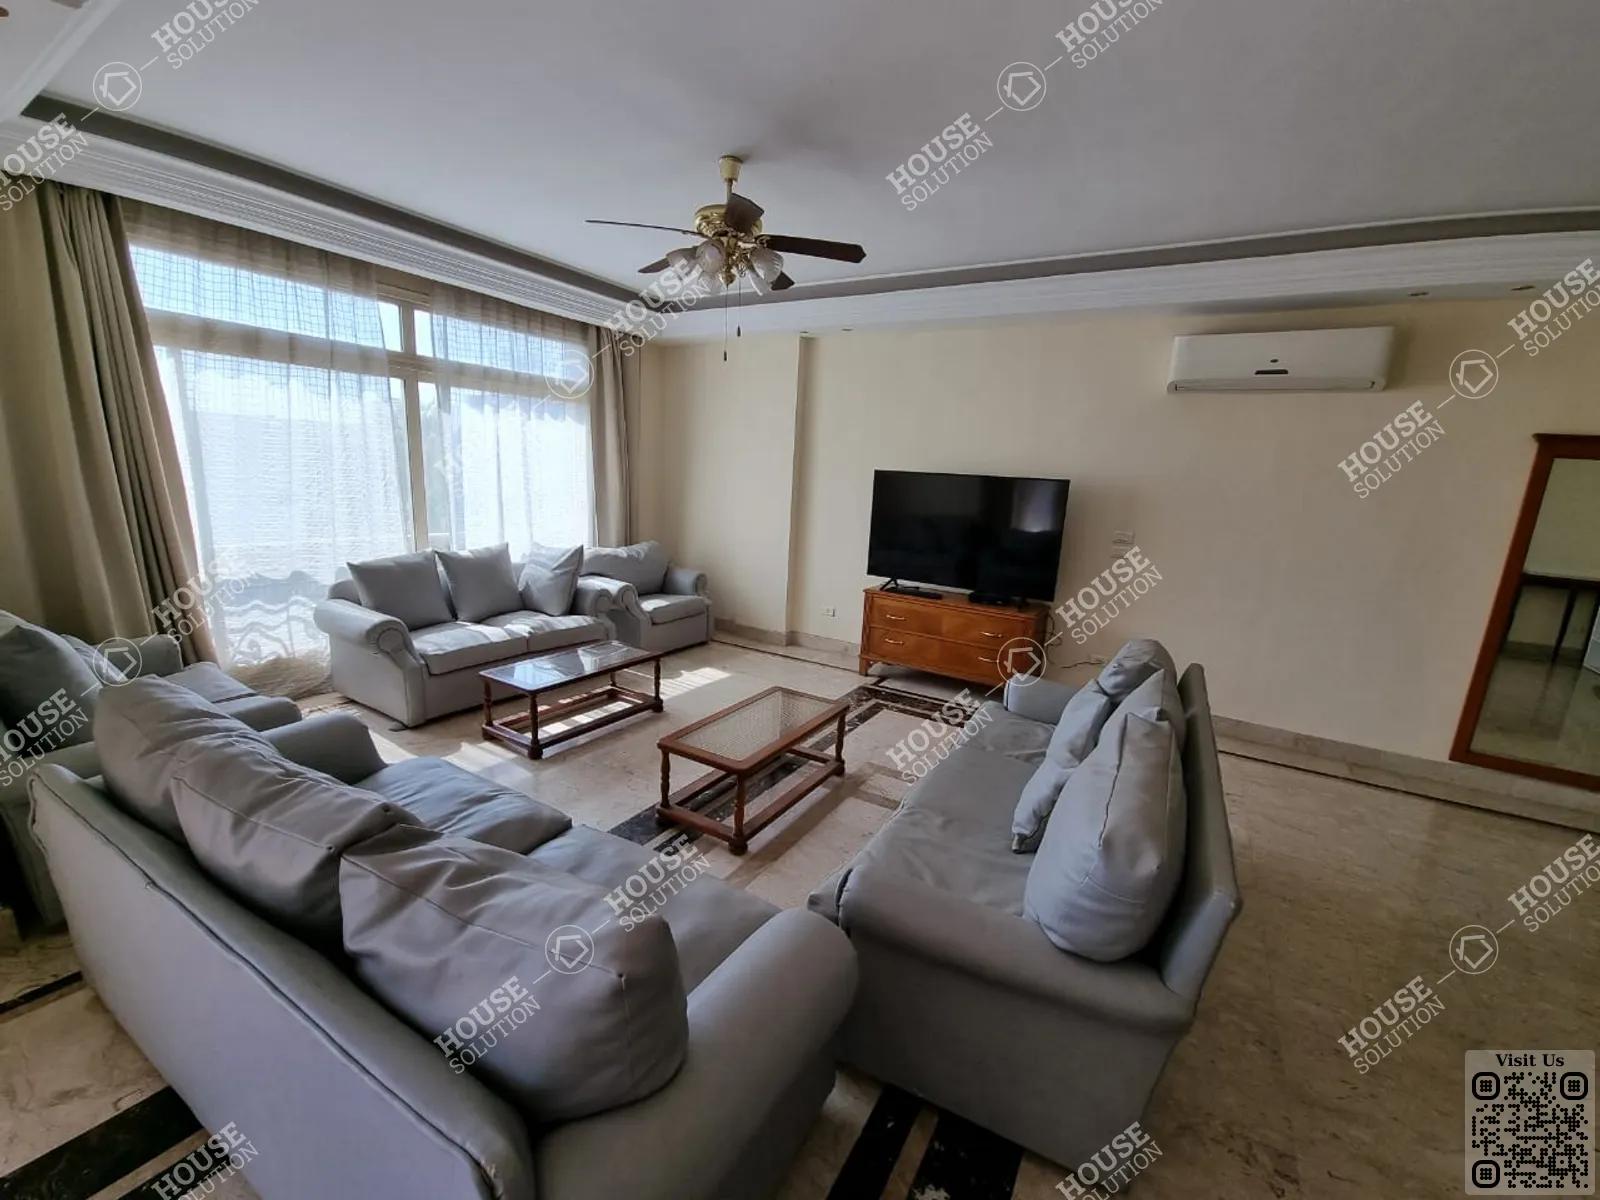 RECEPTION  @ Apartments For Rent In Maadi Maadi Degla Area: 350 m² consists of 4 Bedrooms 4 Bathrooms Modern furnished 5 stars #5510-1